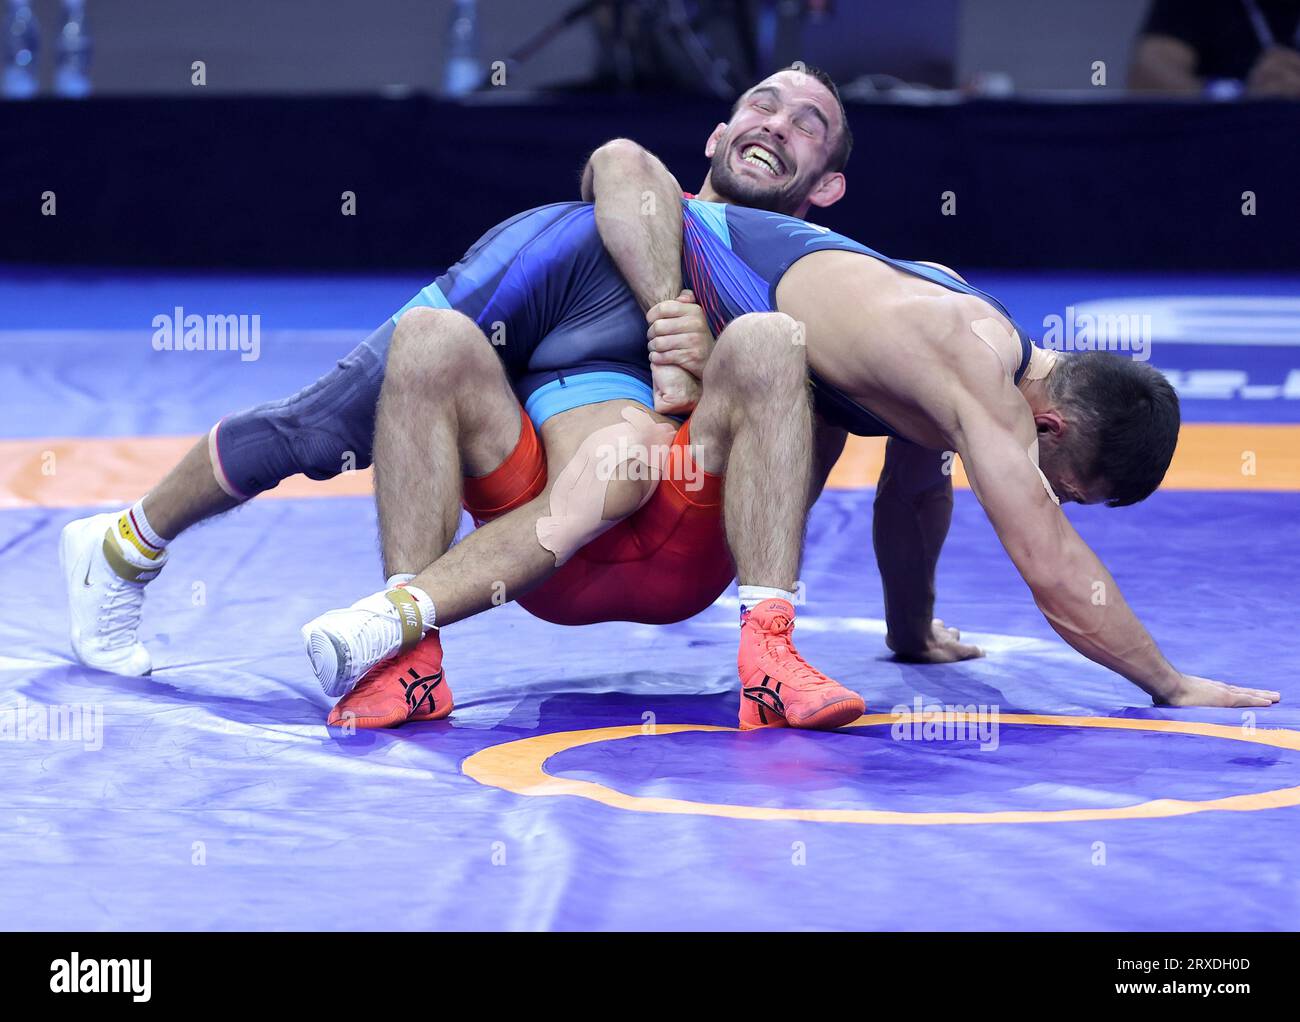 Belgrade. 24th Sep, 2023. Serbia's Mate Nemes (back) and Kyrgyzstan's Amantur Ismailov compete during their match for bronze medal in the men's 67kg Greco-Roman category at the Wrestling World Championships in Belgrade, Serbia on Sept. 24, 2023. Credit: Predrag Milosavljevic/Xinhua/Alamy Live News Stock Photo